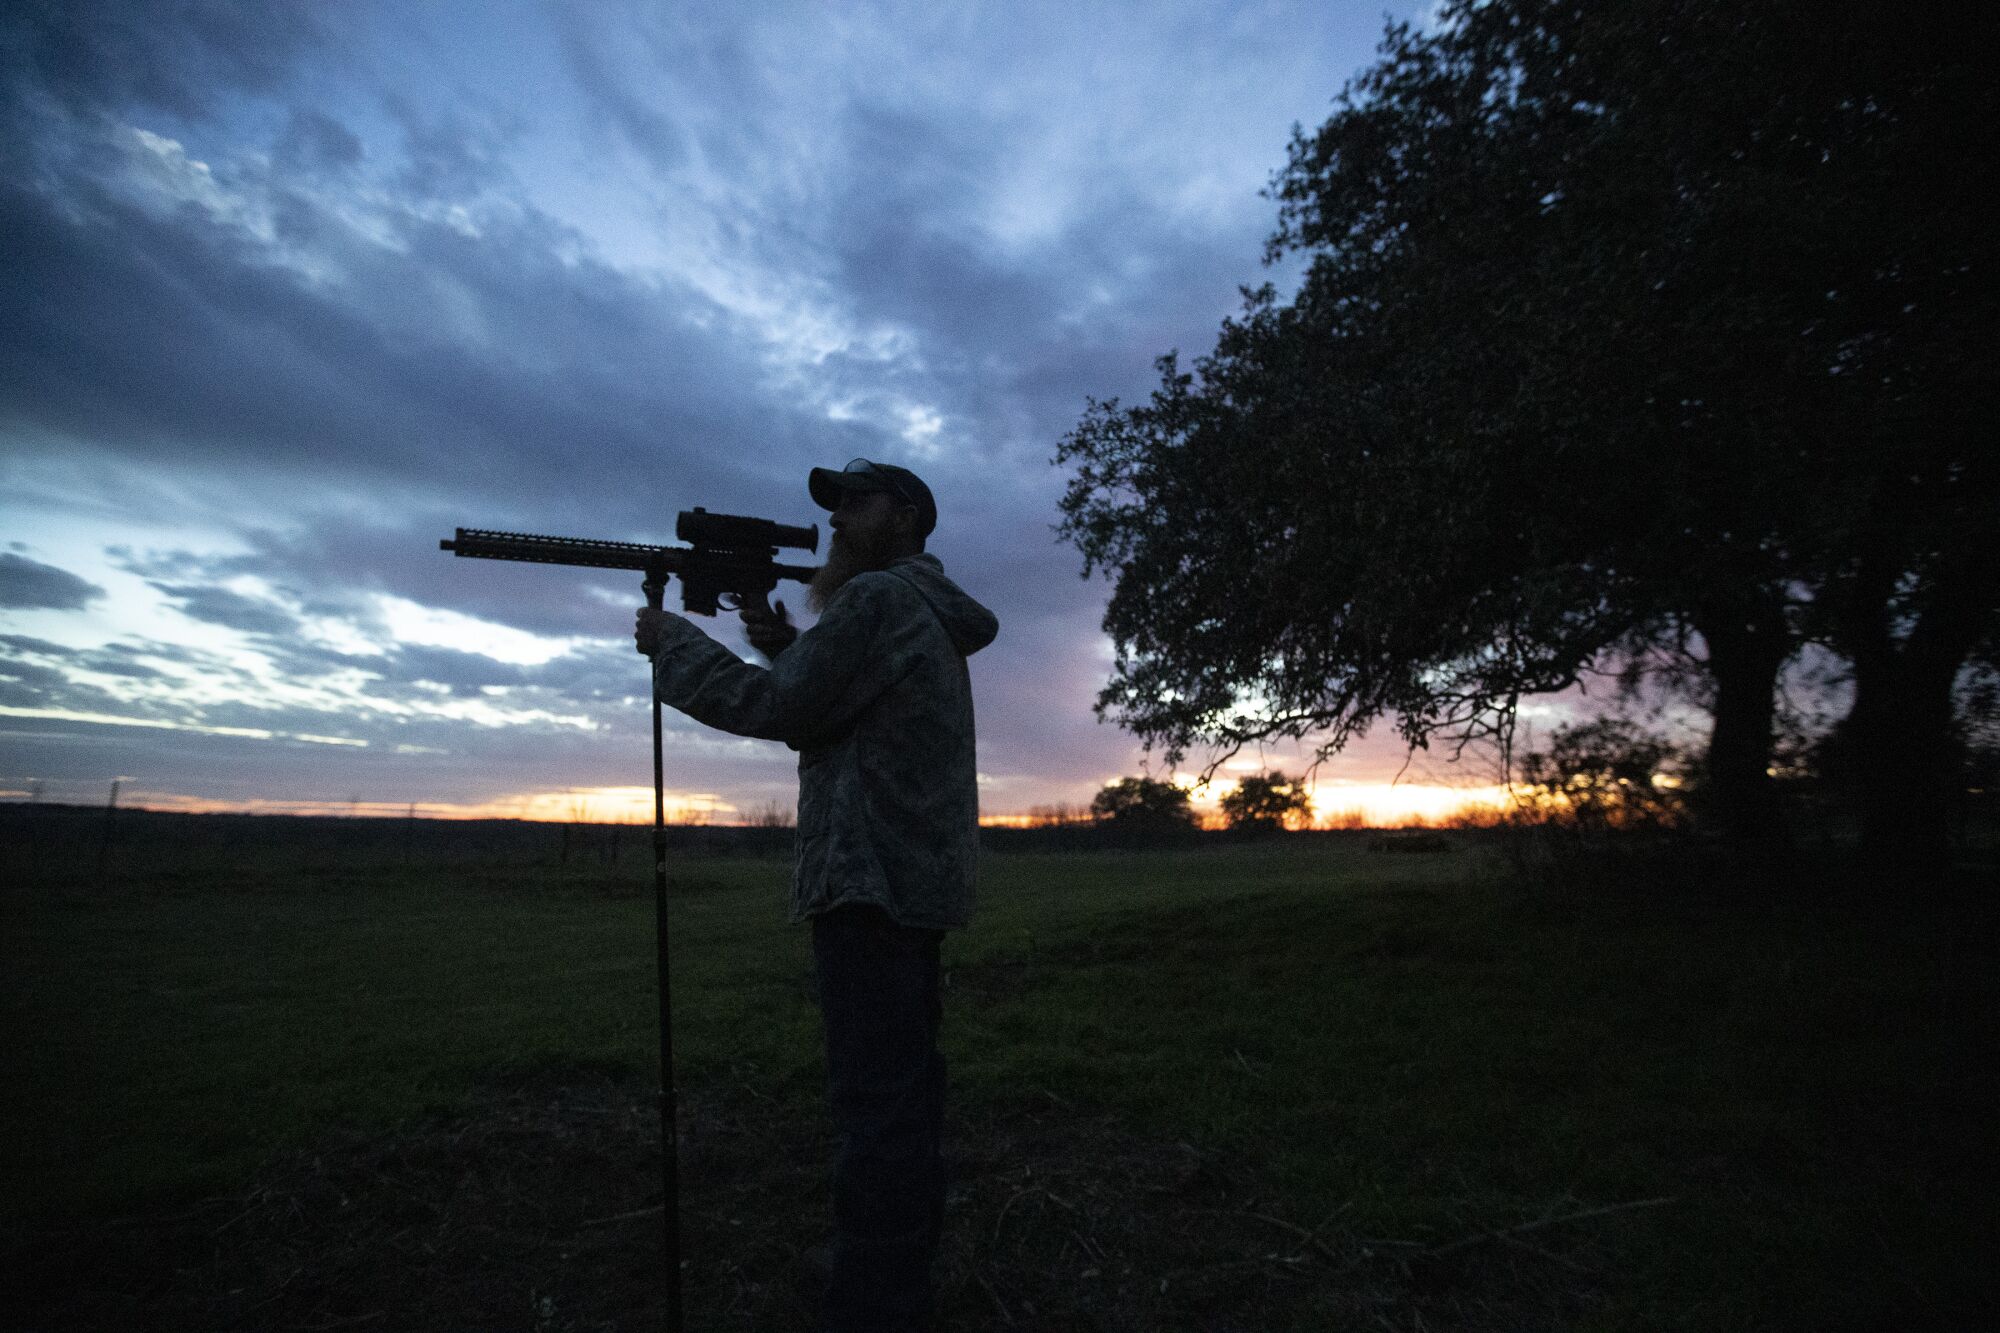 Fred Jones peers through the infrared scope on his rifle in rural Throckmorton County, Texas.